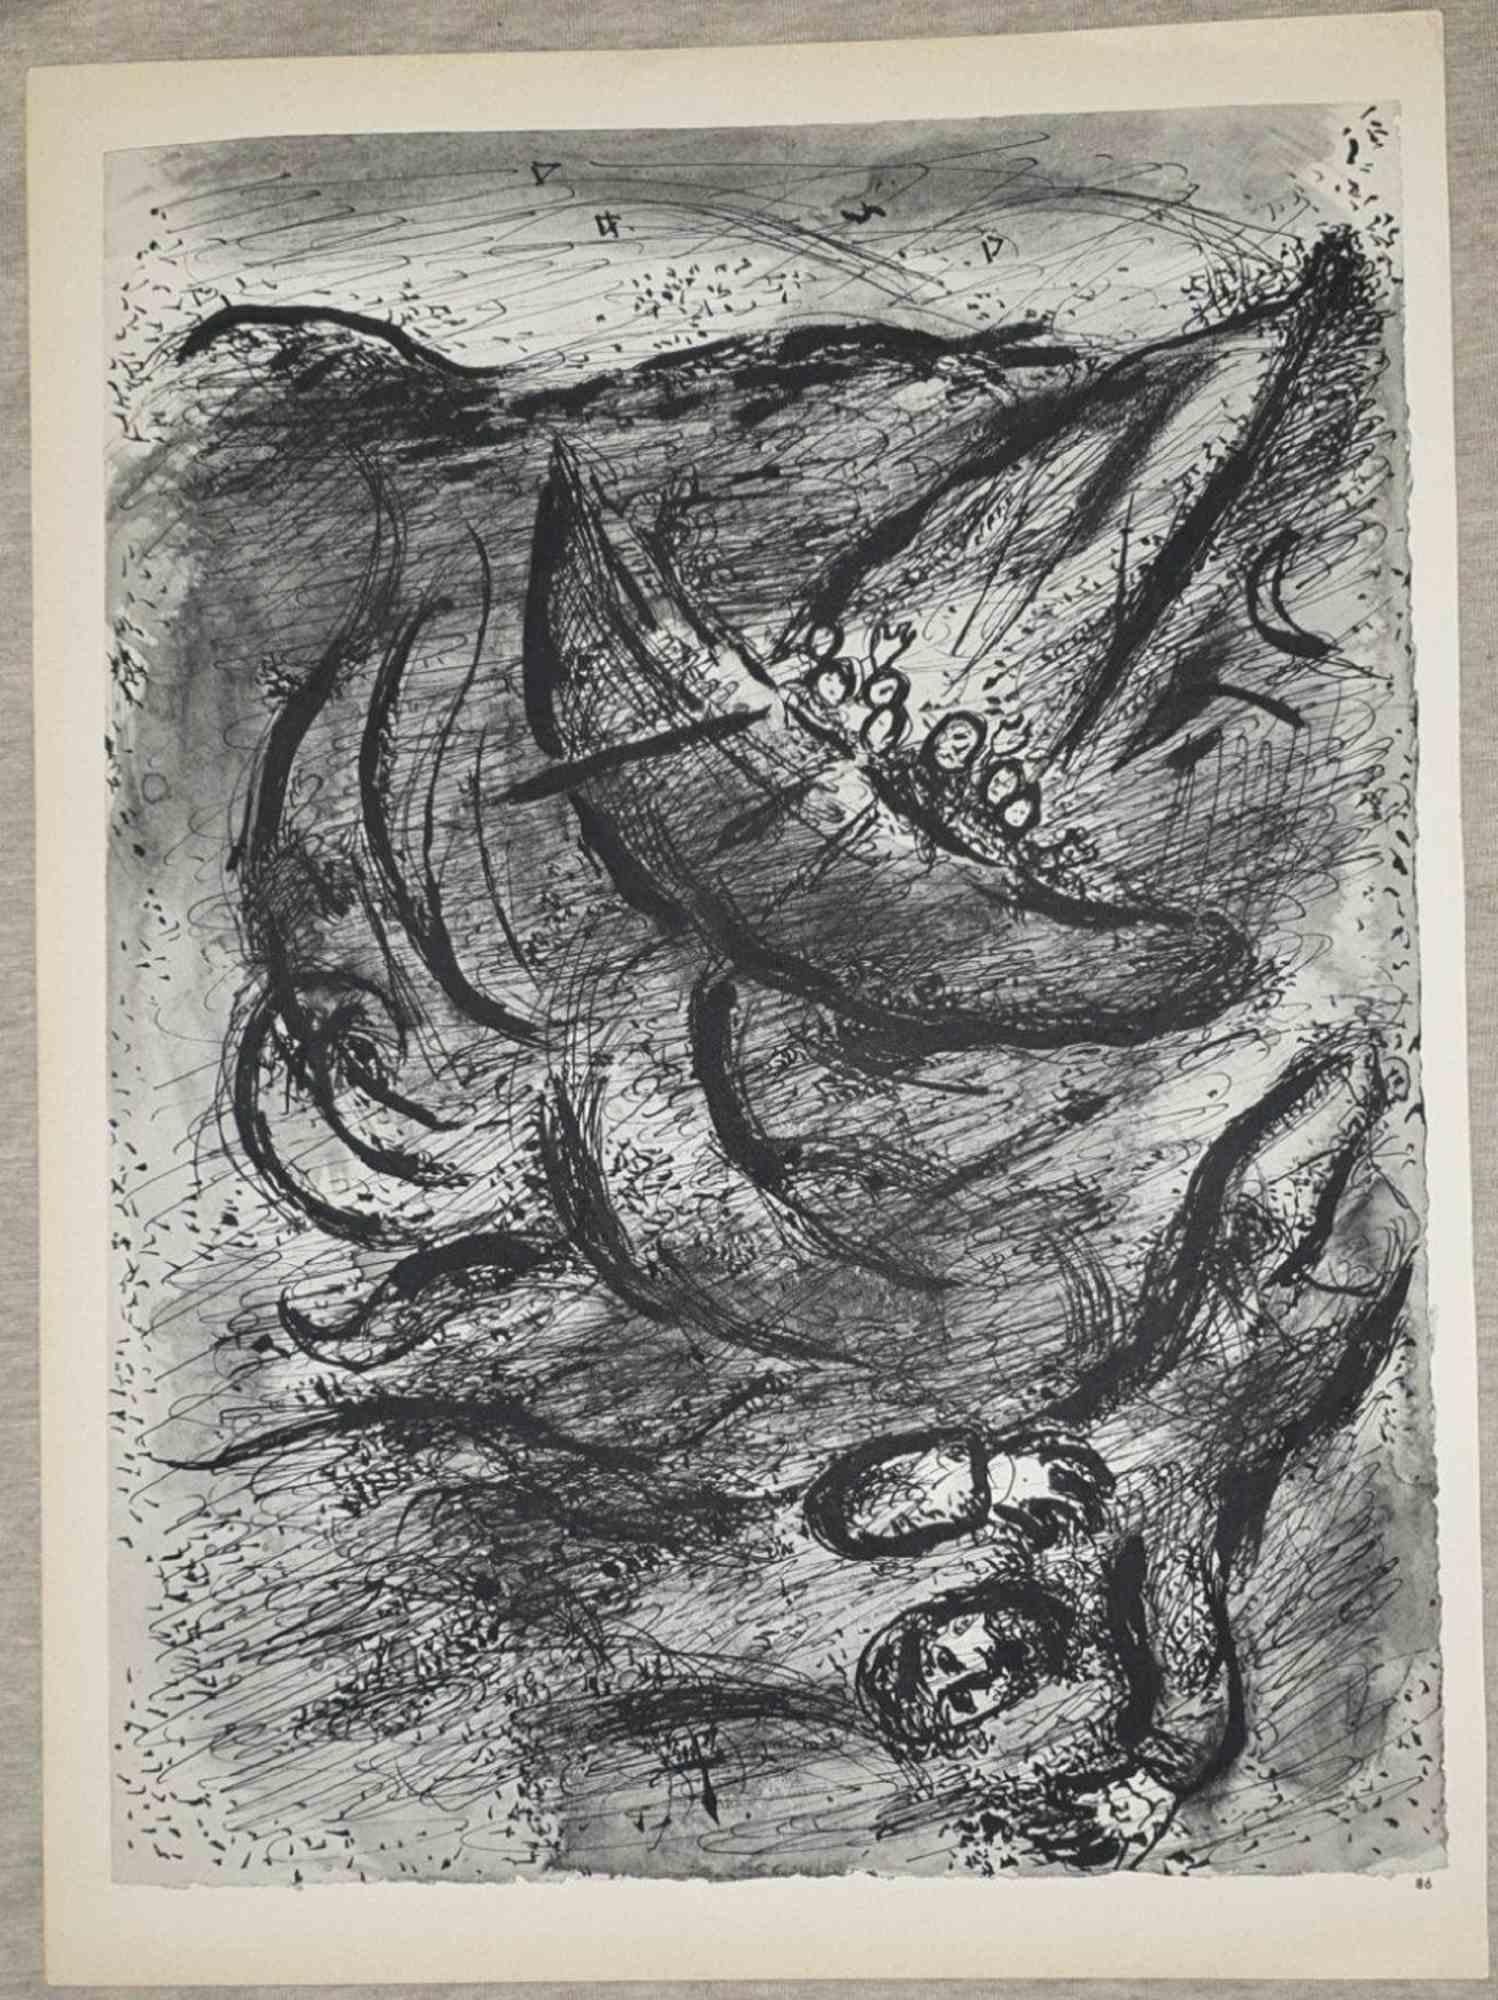 Jonas  is an artwork realized by March Chagall, 1960s.

Lithograph on brown-toned paper, no signature.

Lithograph on both sides.

Edition of 6500 unsigned lithographs. Printed by Mourlot and published by Tériade, Paris.

Ref. Mourlot, F., Chagall